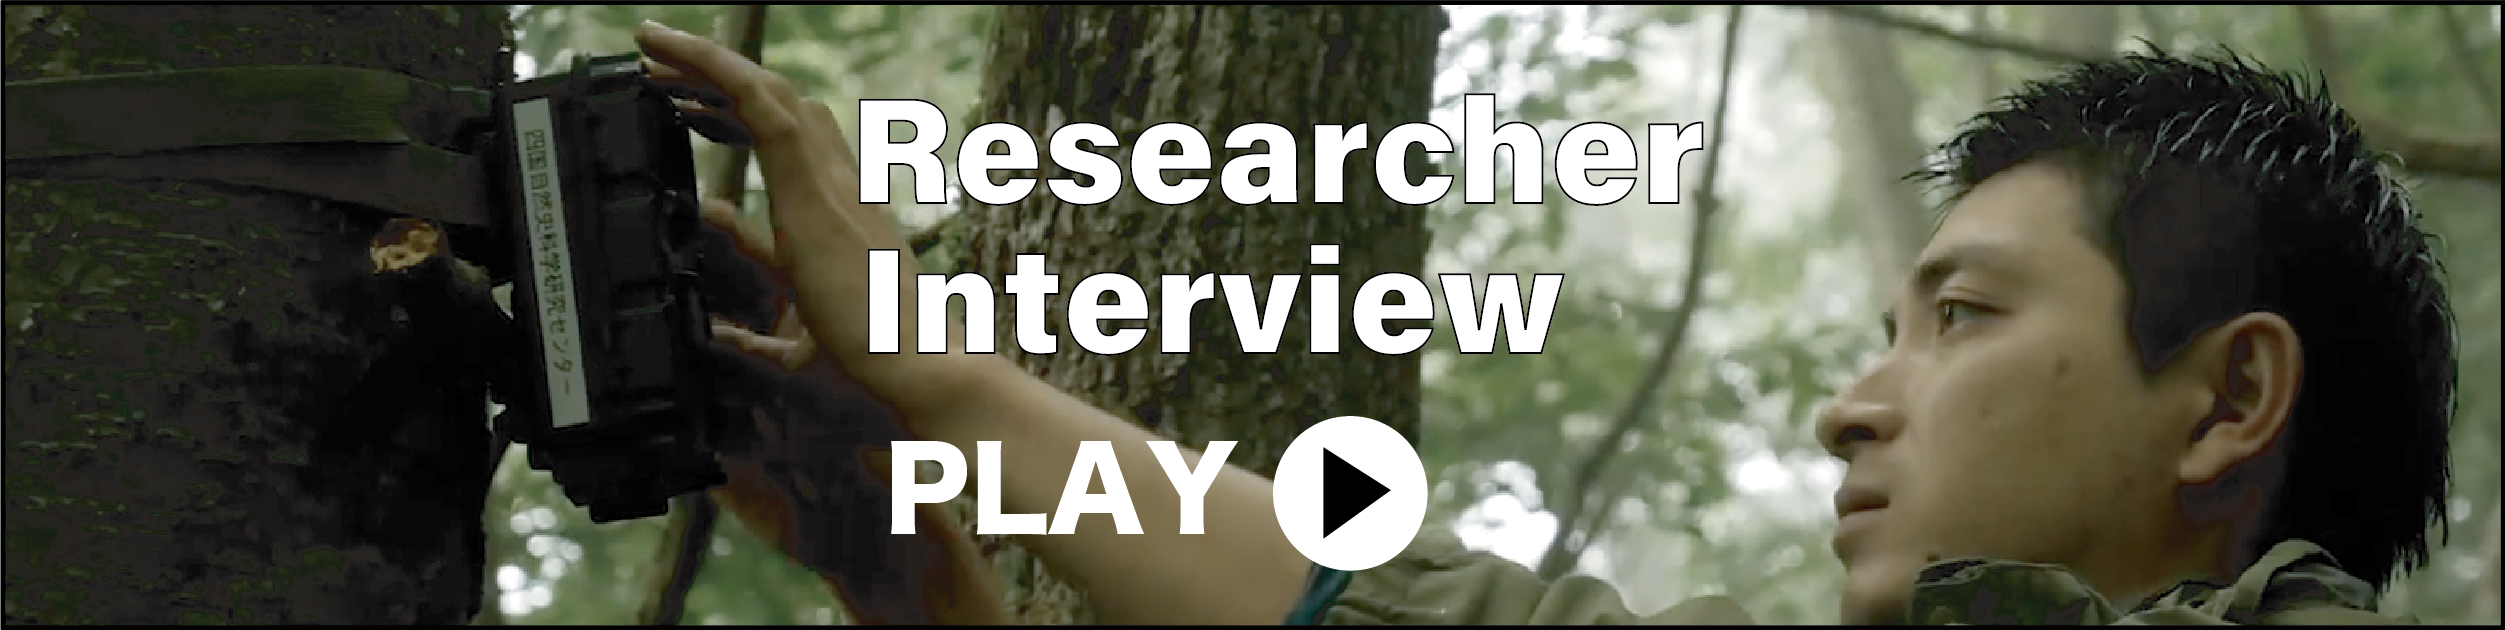 Researcher Interview PLAY